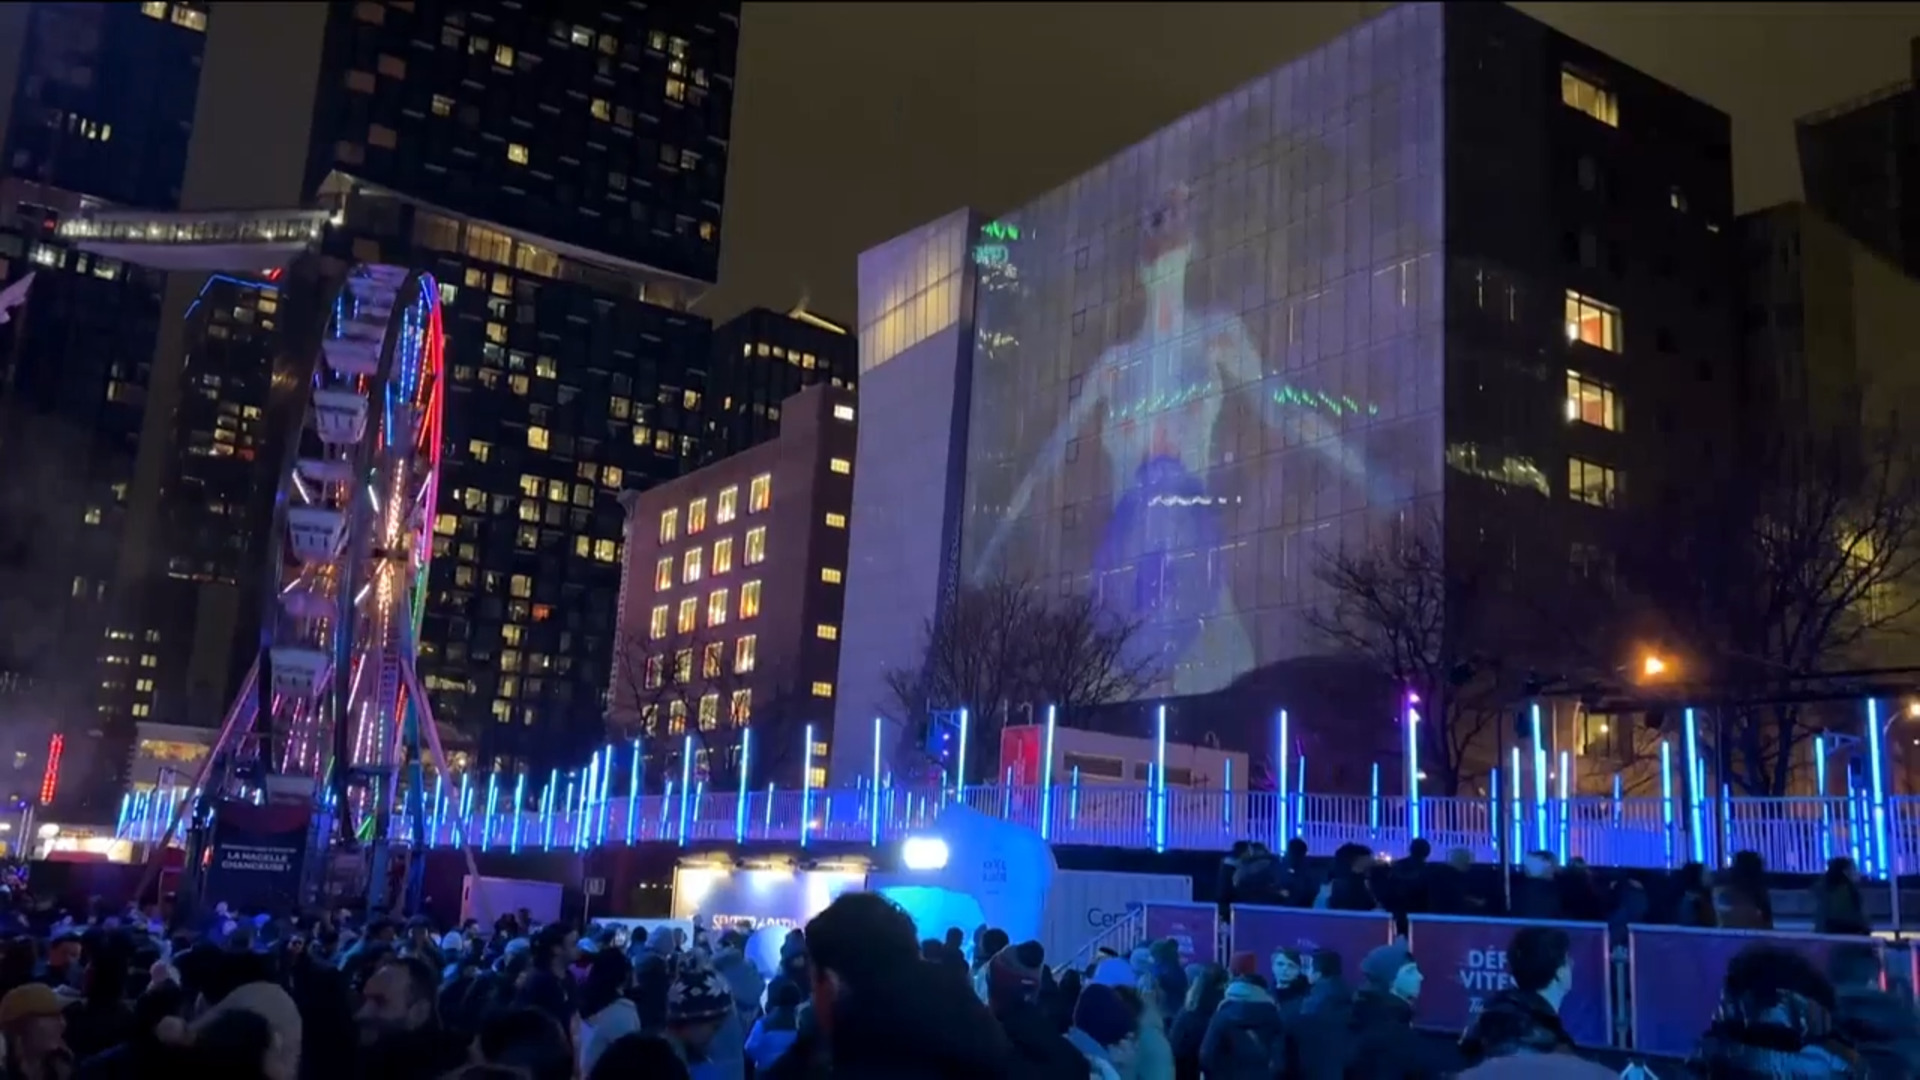 Festival-goers celebrate Montreal’s 21st annual Nuit Blanche